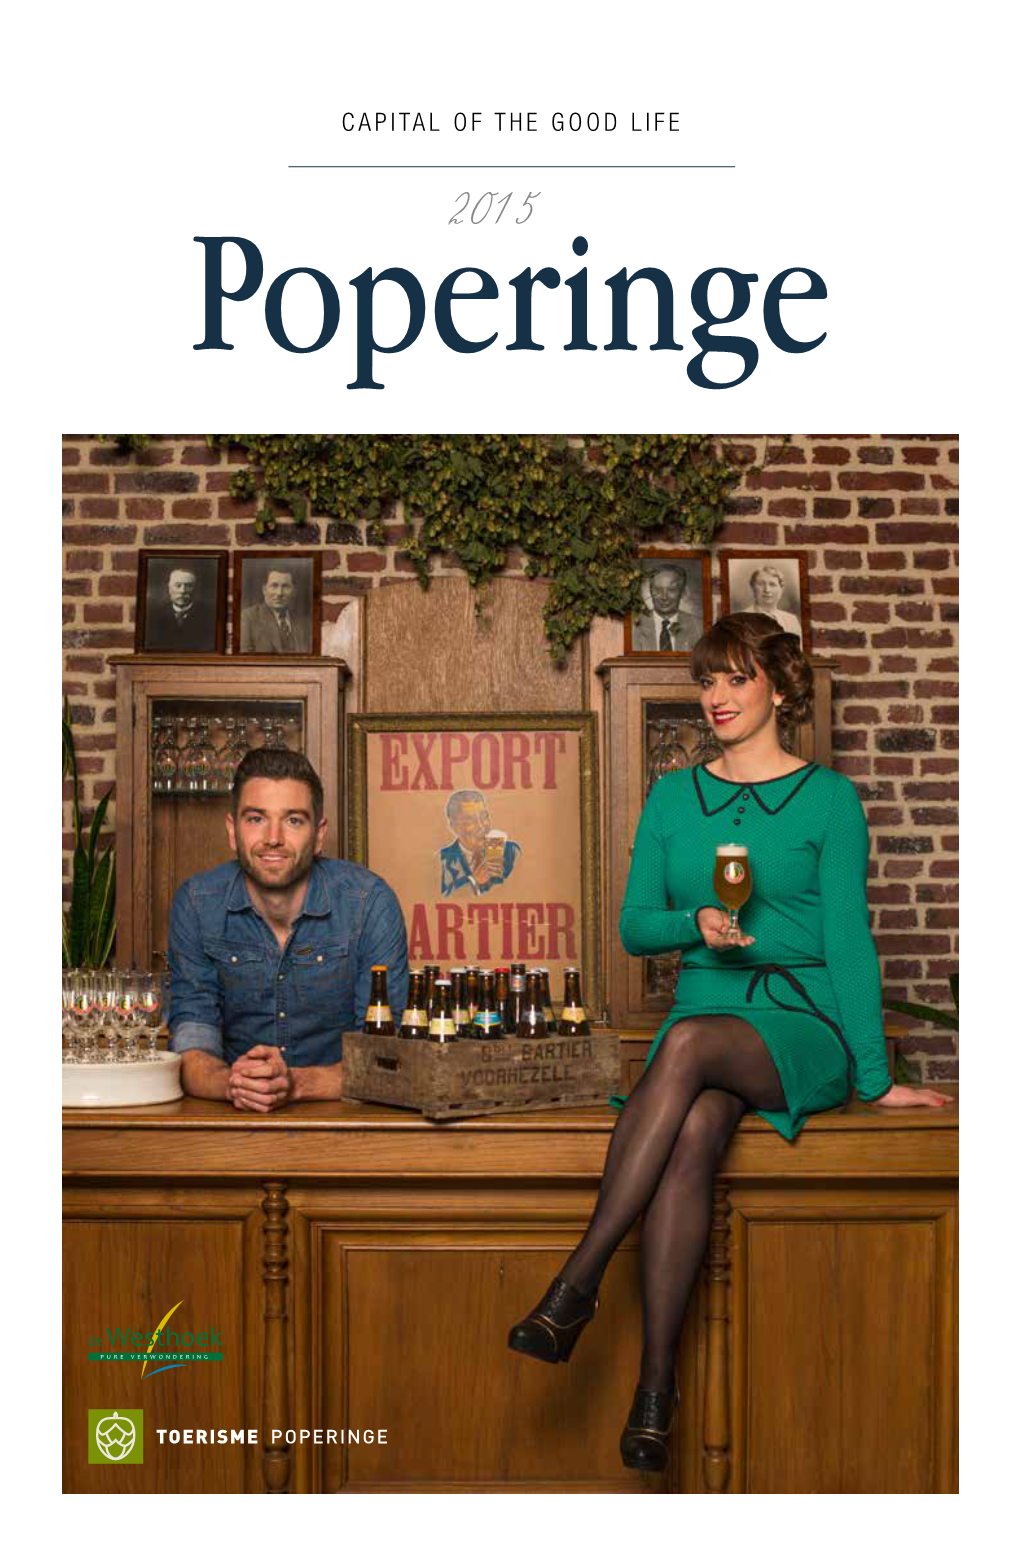 CAPITAL of the GOOD LIFE Poperinge2015 I Guess I Must Have Been Around 10 Years Old When My Family and I First Discovered Poperinge